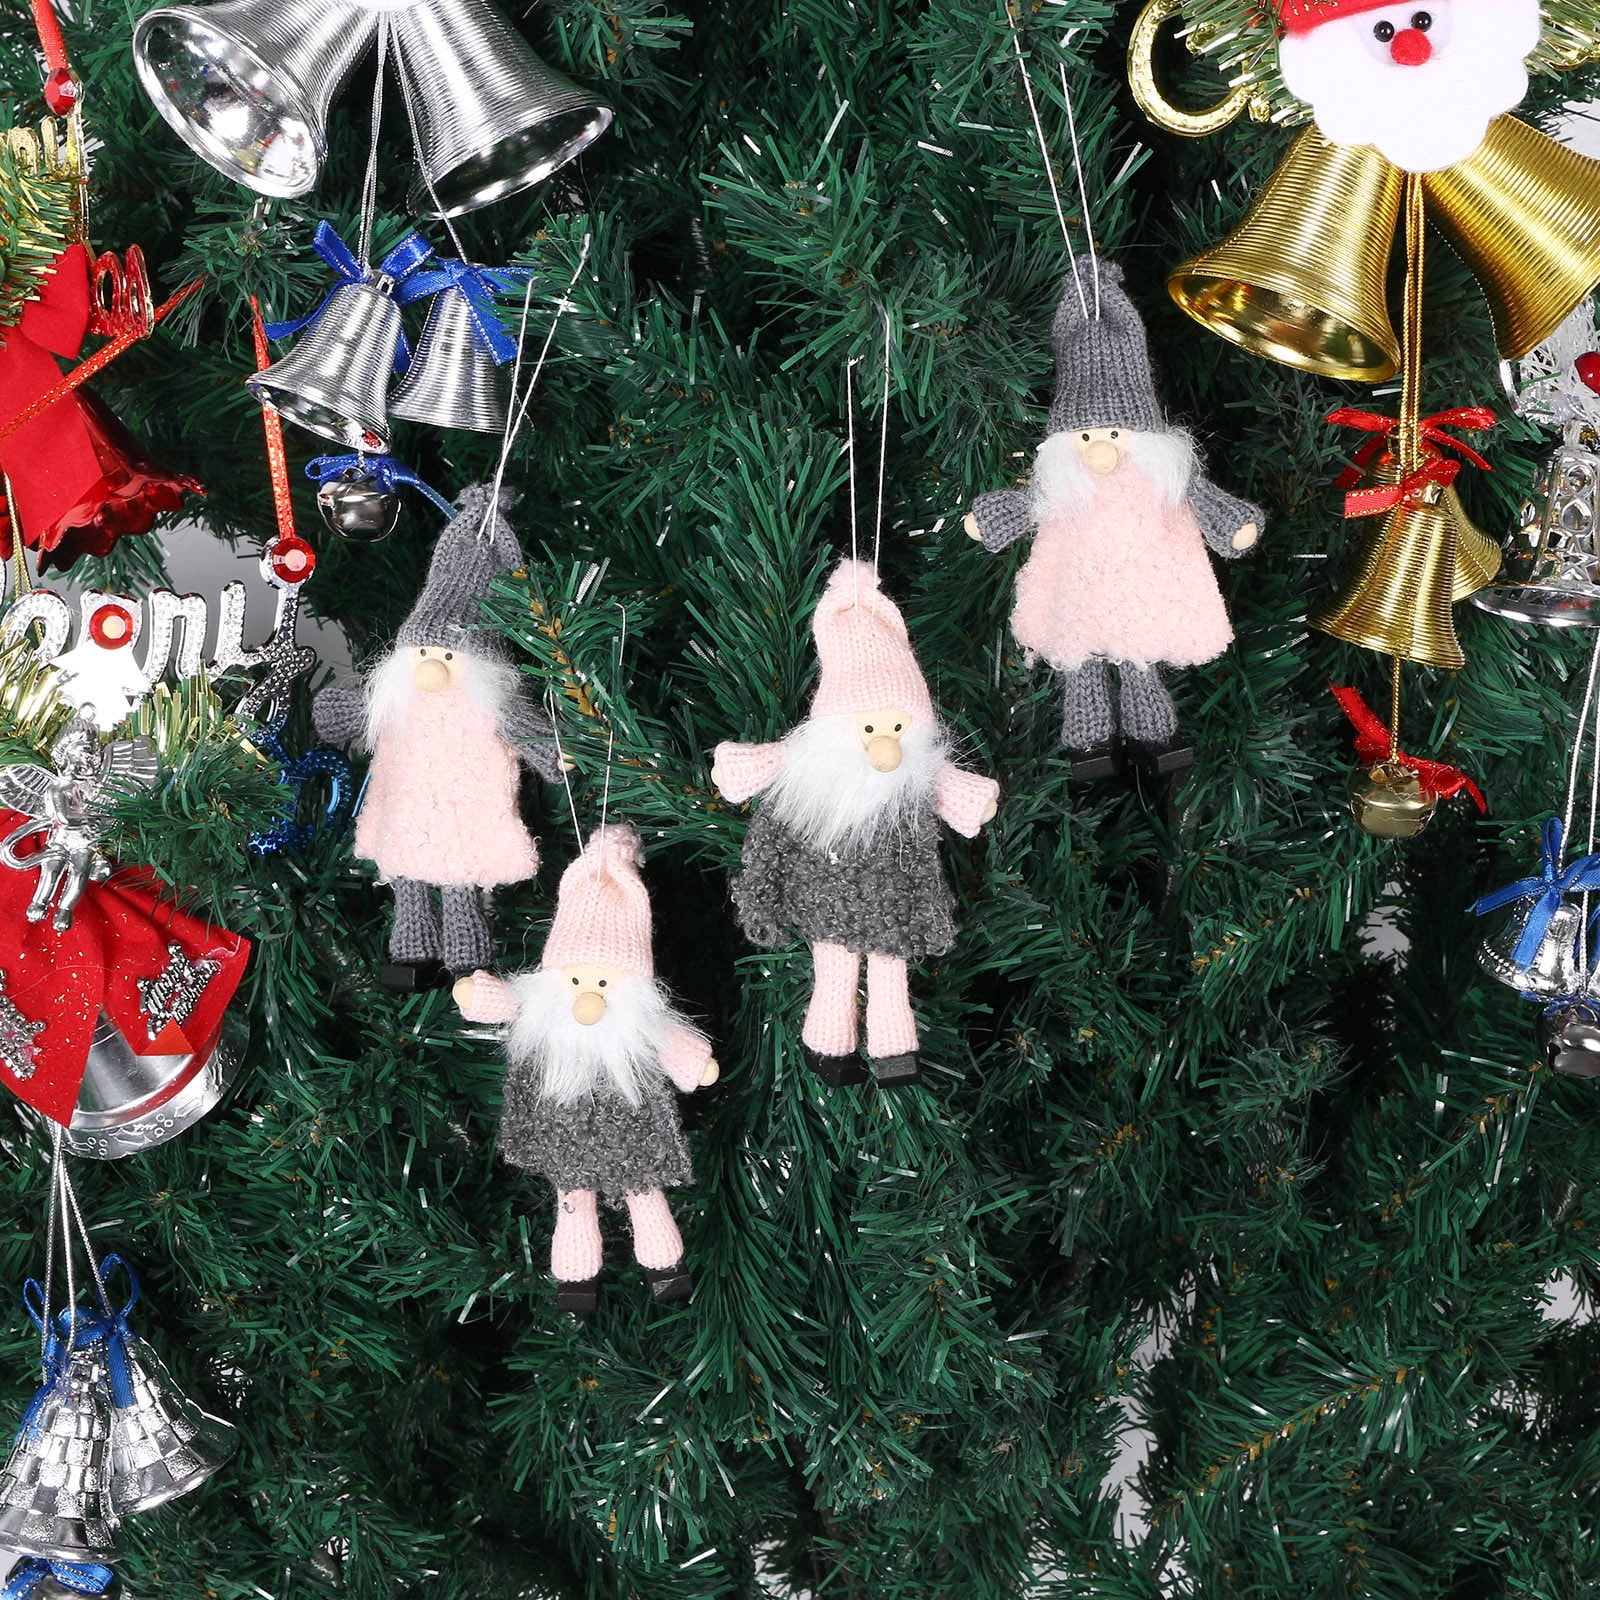 2021 Christmas Decorations,4 Pack Xmas Tree Decorations Christmas Ornaments Gift Santa Claus Snowman Tree Toy Doll Hang Decor Merry Christmas Decorative Pendants Party Decor Gifts Home Bedroom 4pc